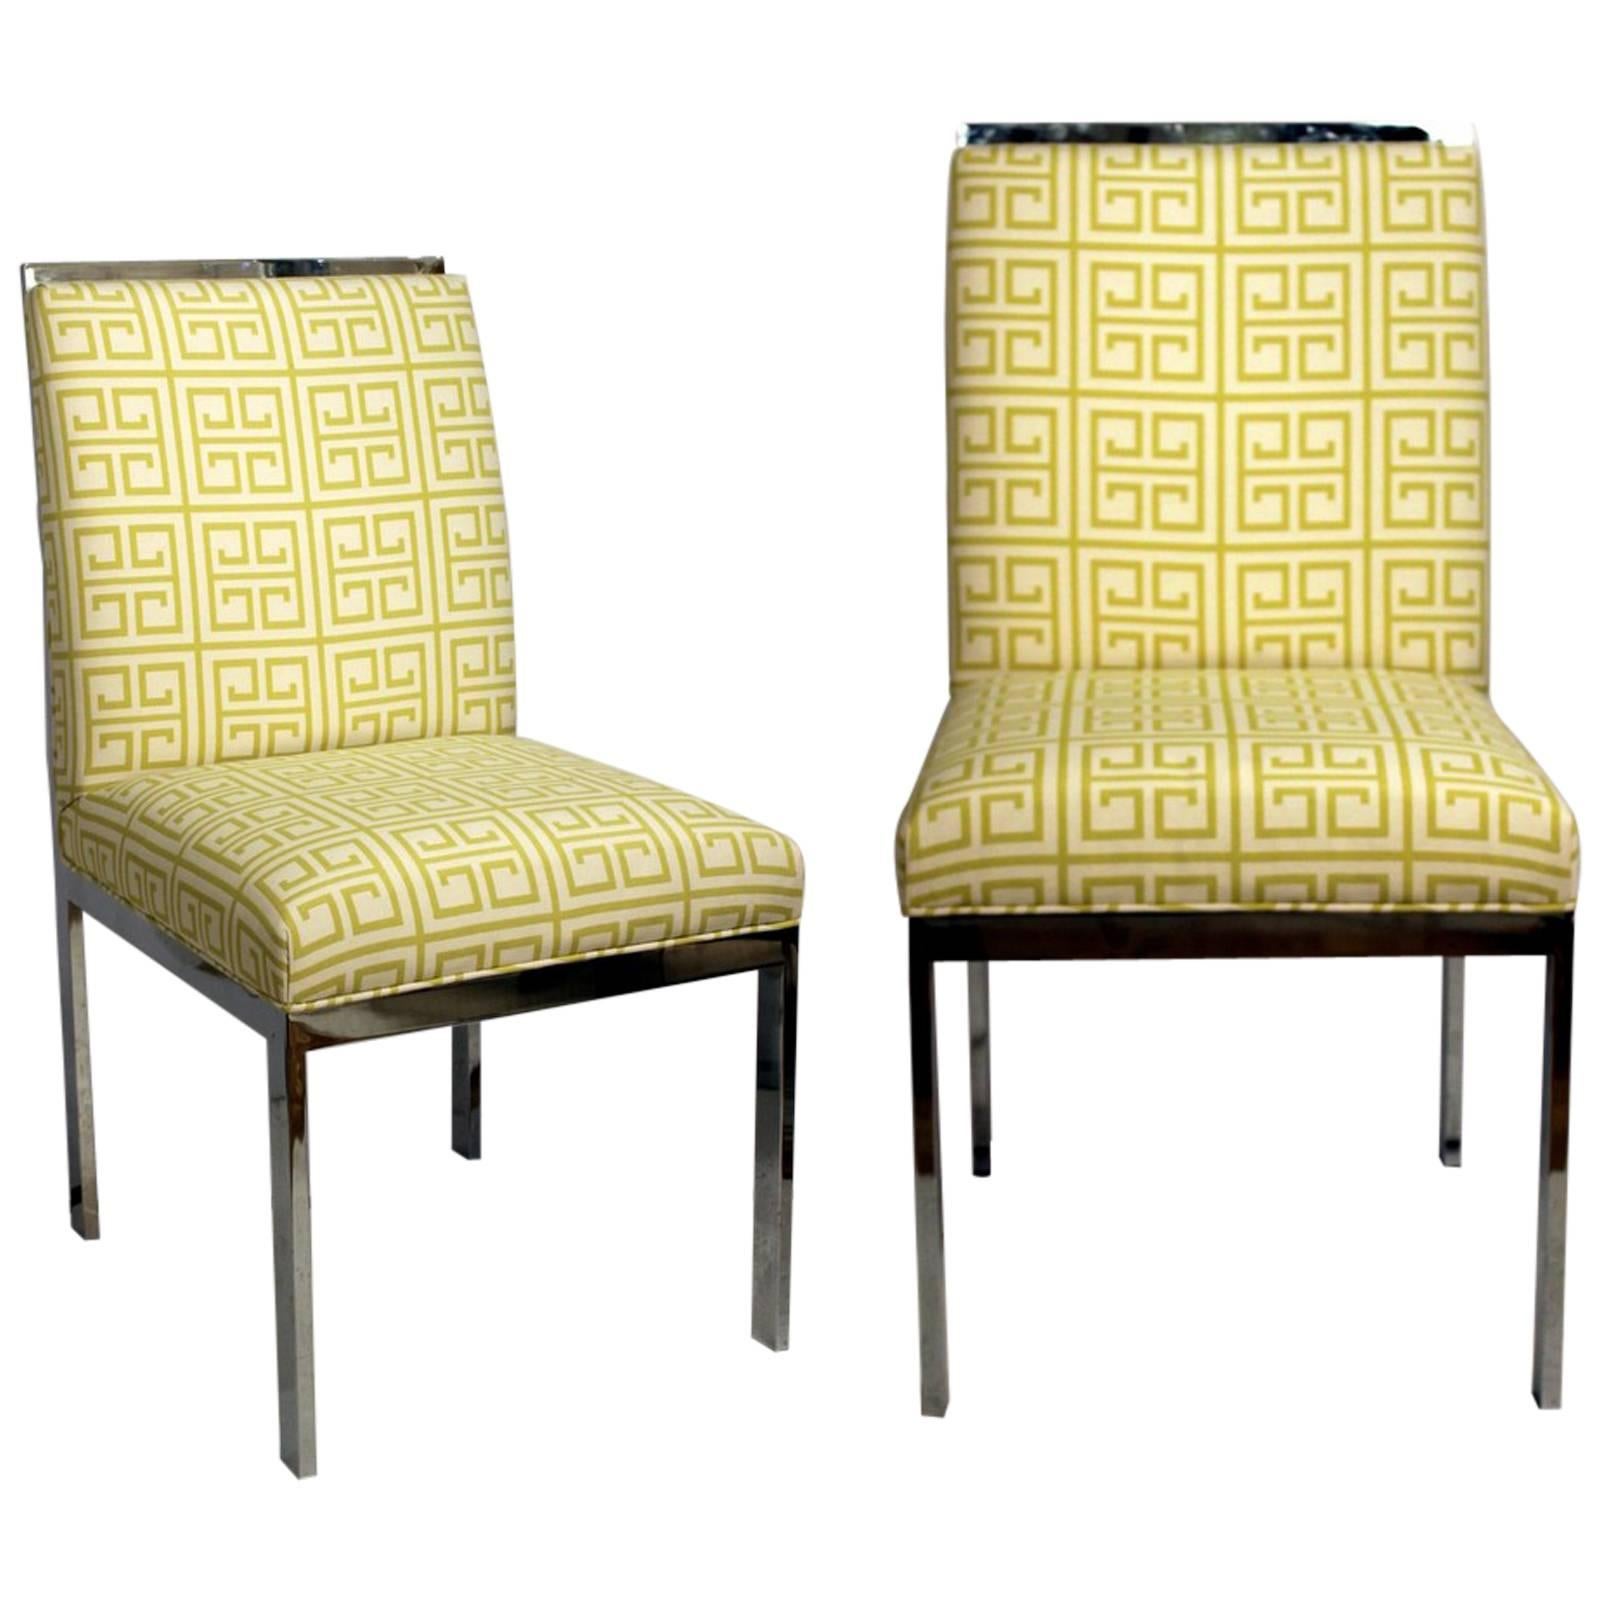 Pair of Mid-Century Chrome Chairs New Upholstered Citron Greek Key